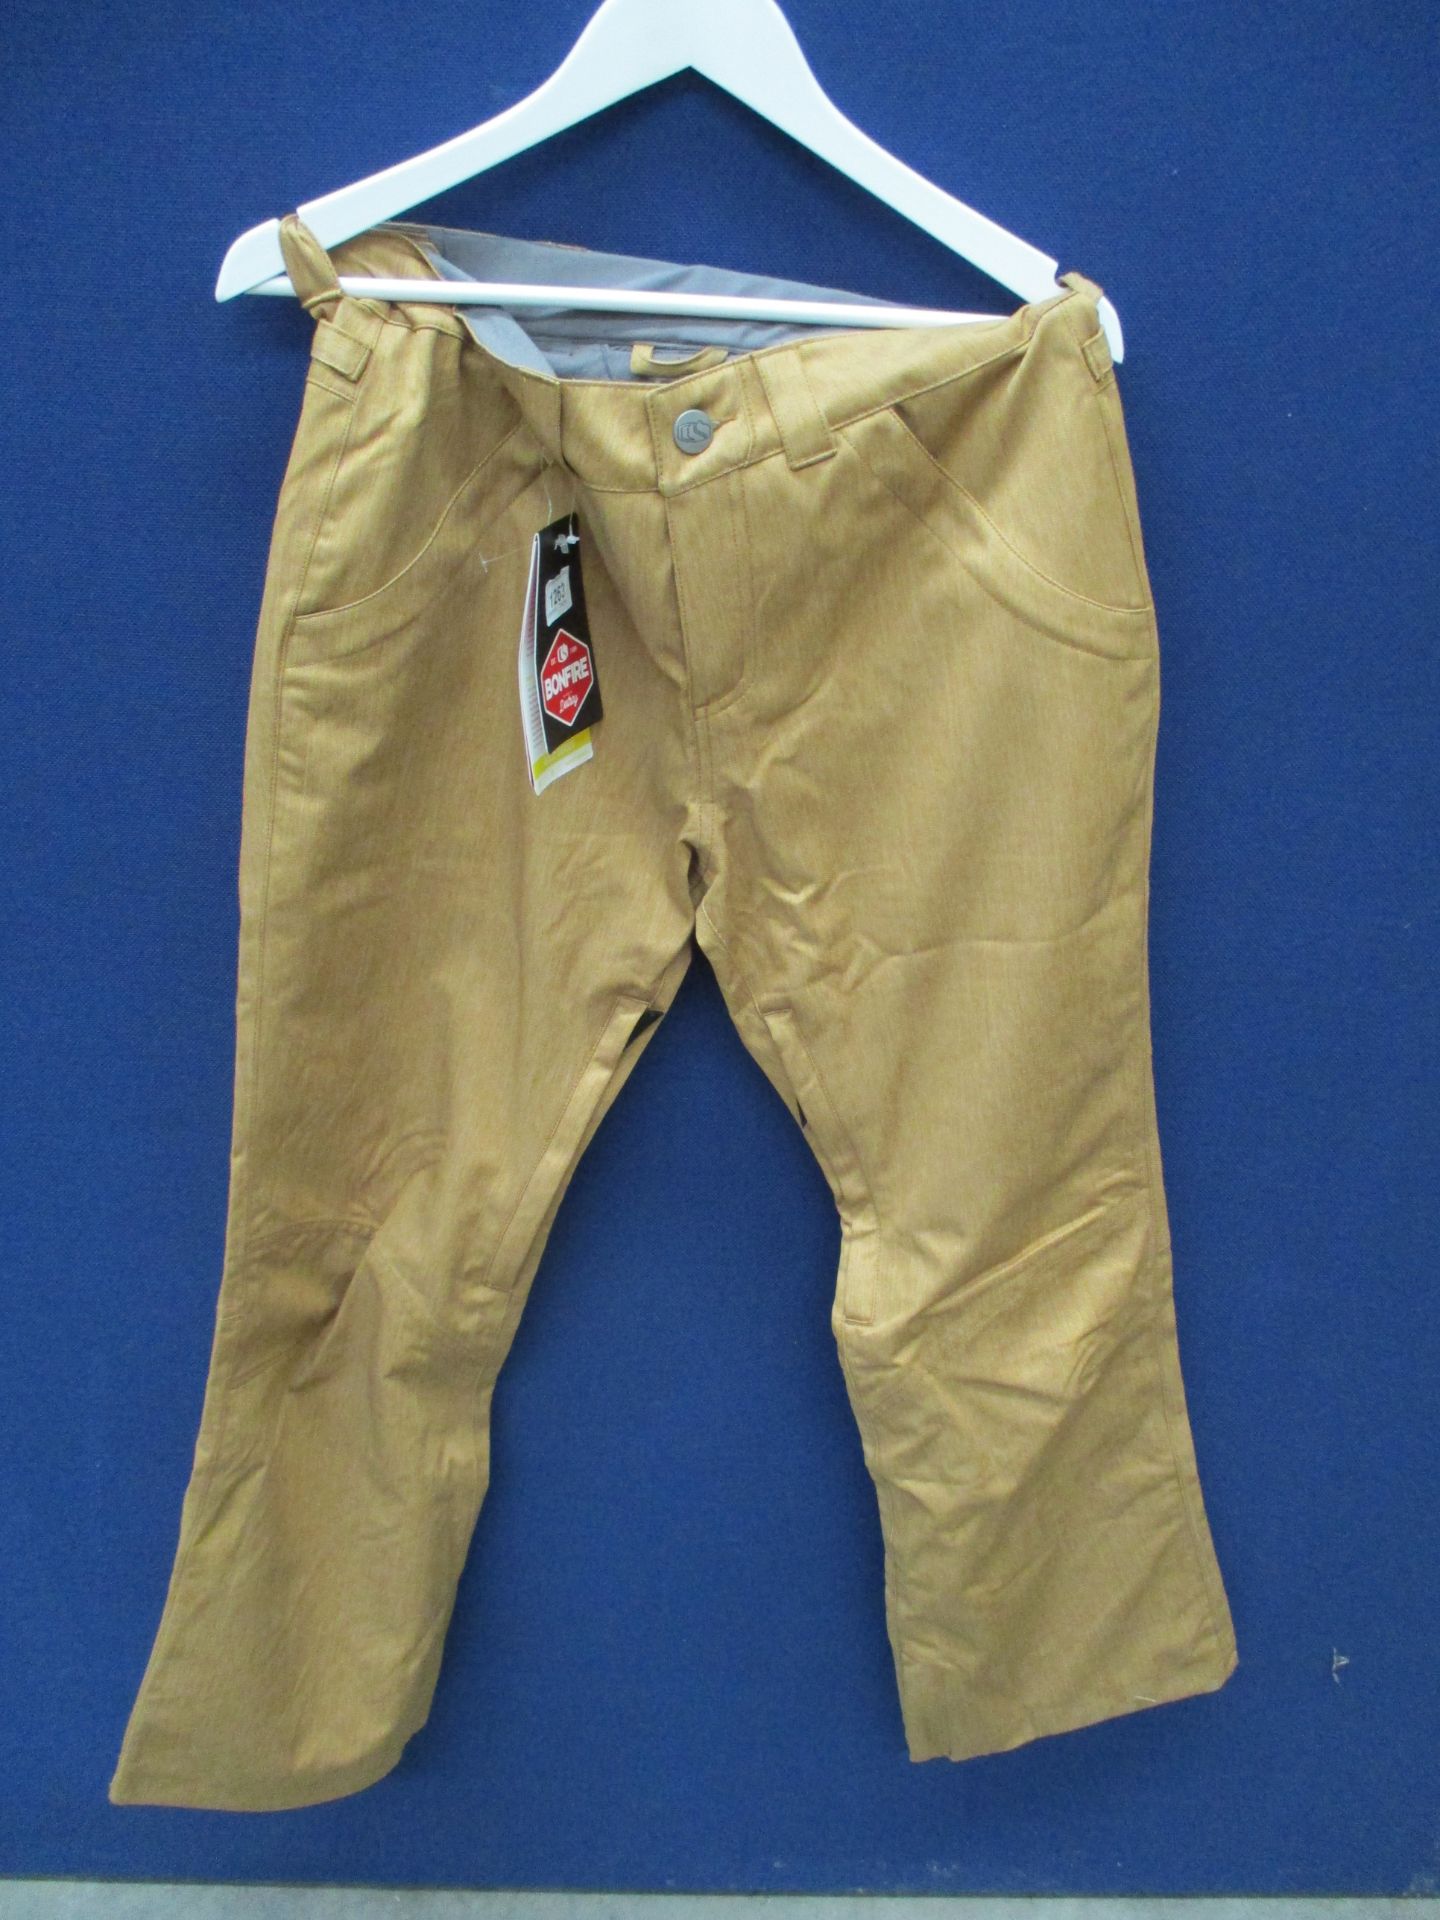 A pair of Bonfire Destroy W Remy ski trousers in camel size M RRP £112